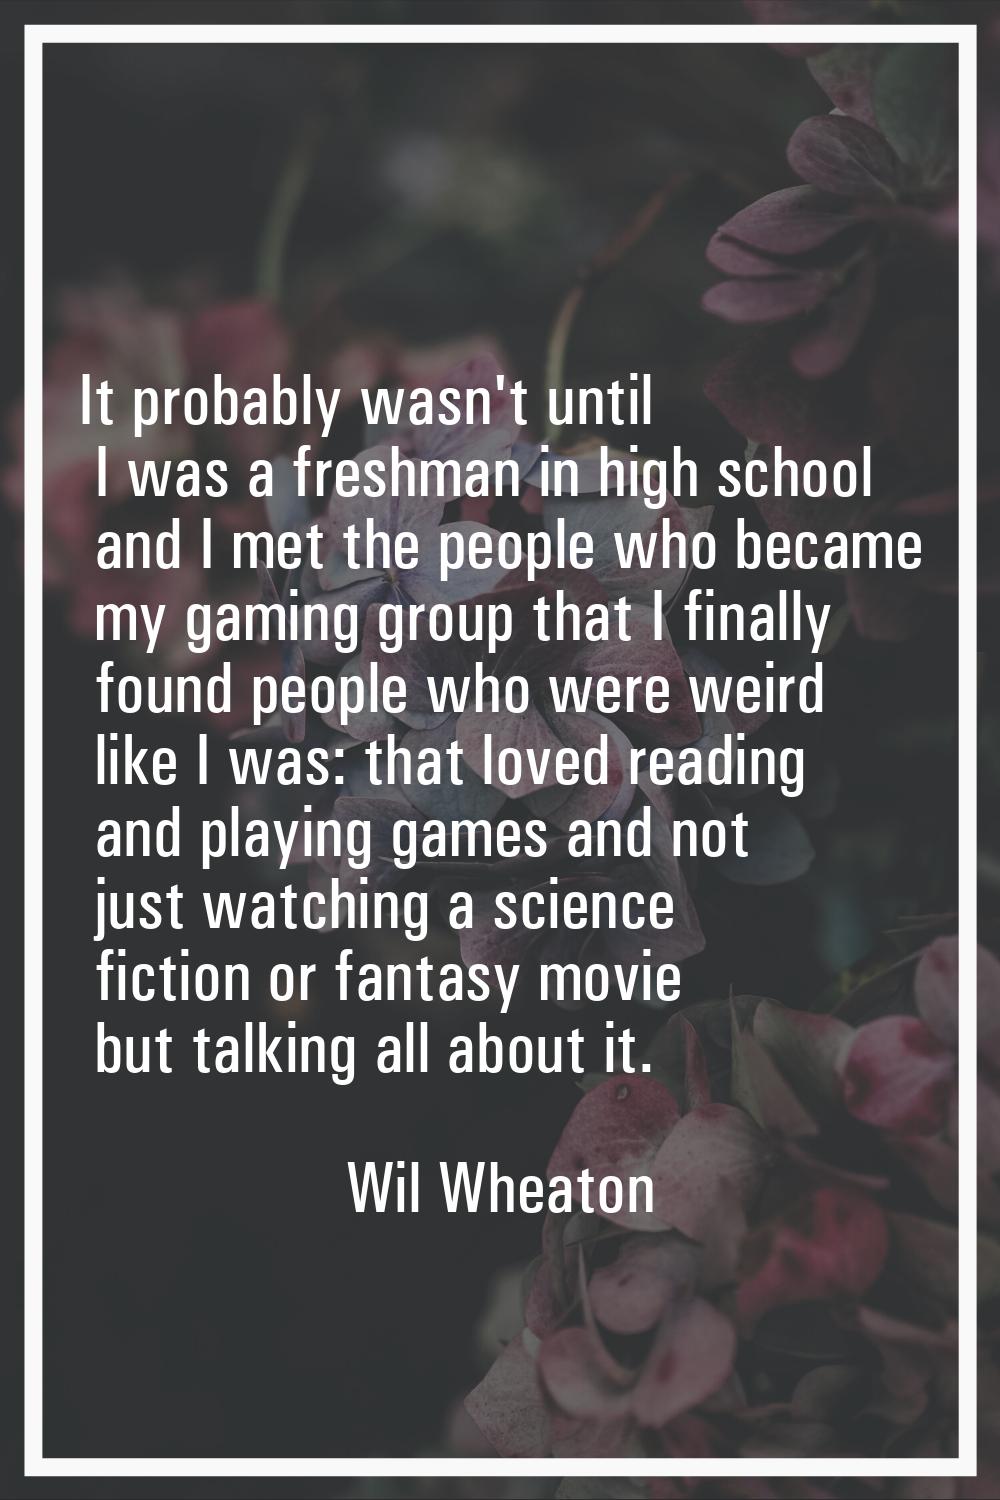 It probably wasn't until I was a freshman in high school and I met the people who became my gaming 